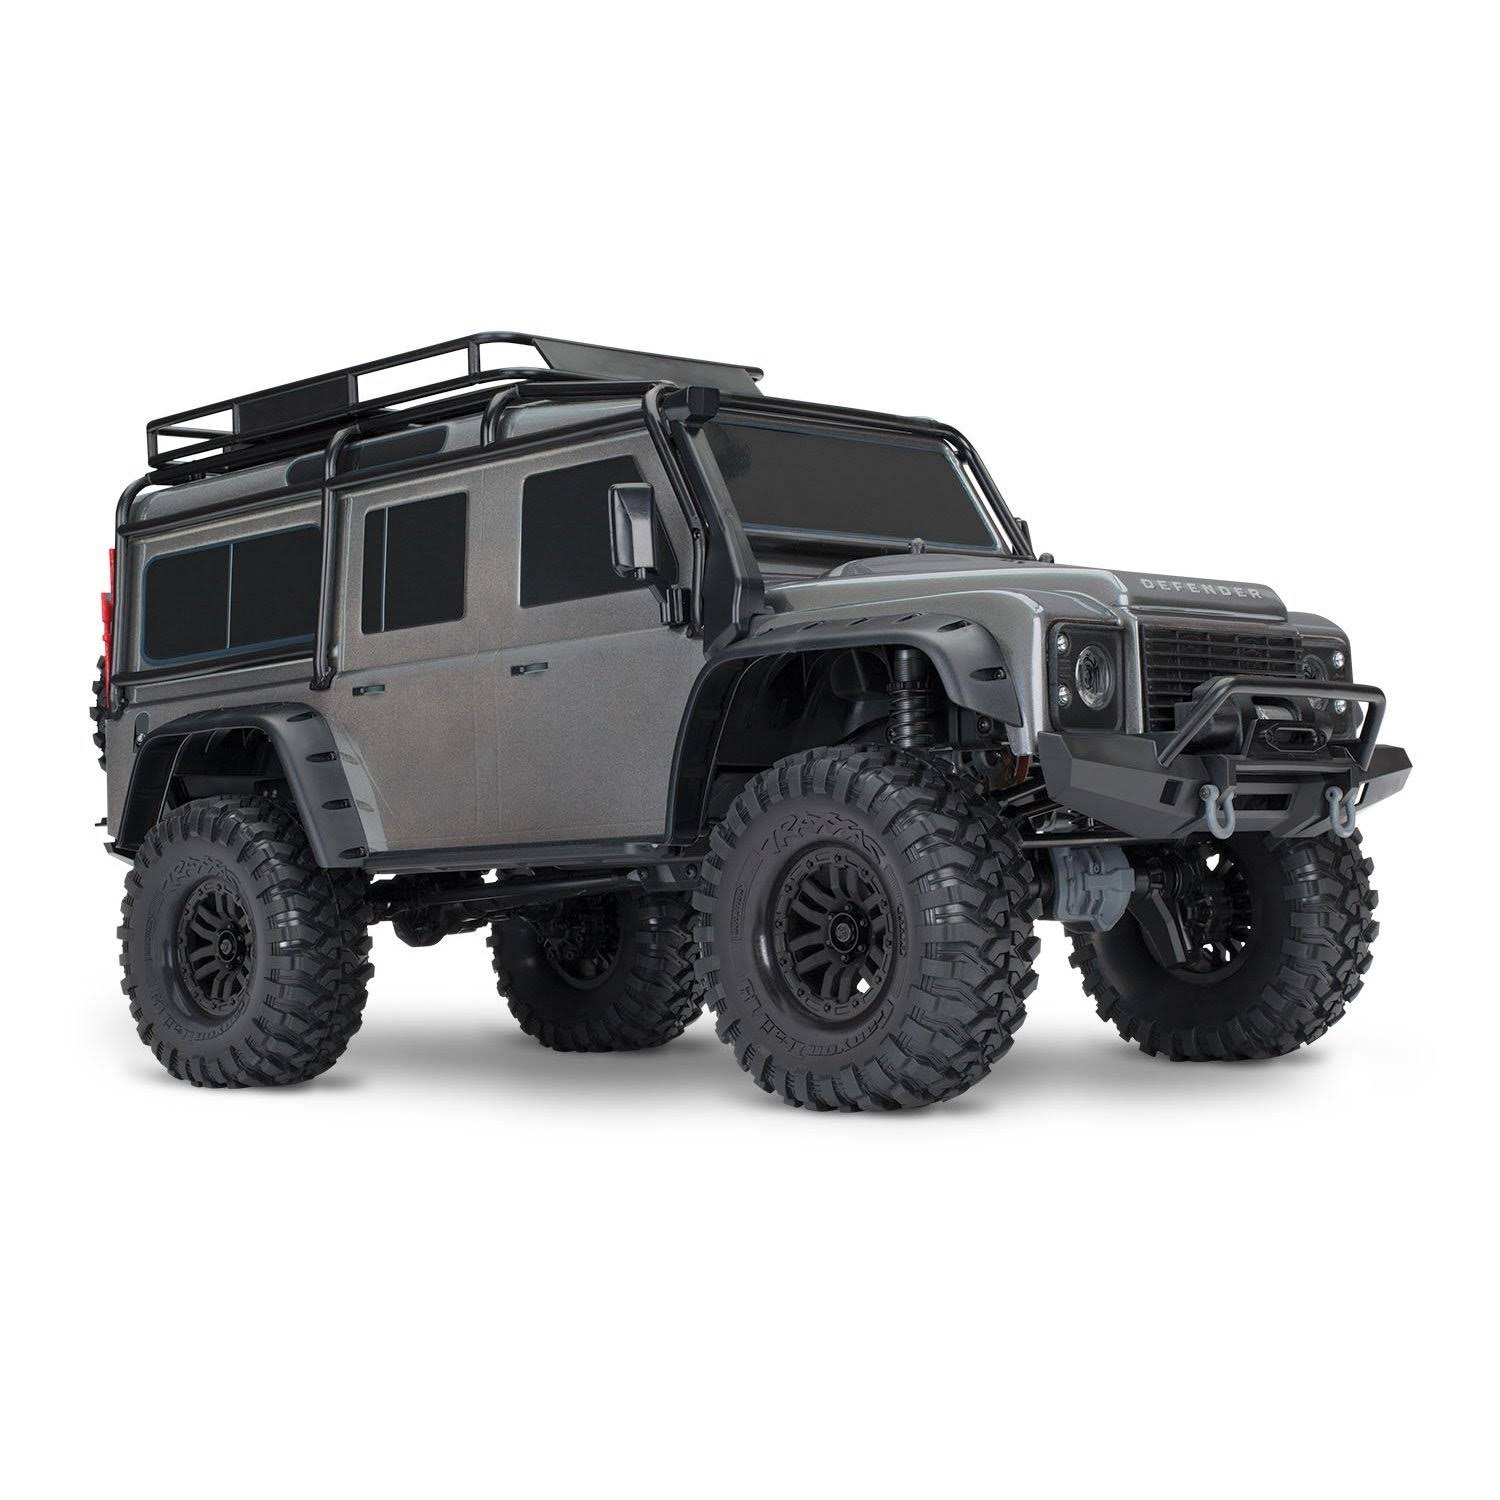 Traxxas TRX-4 Scale and Trail Crawler with Land Rover Defender (Silver)